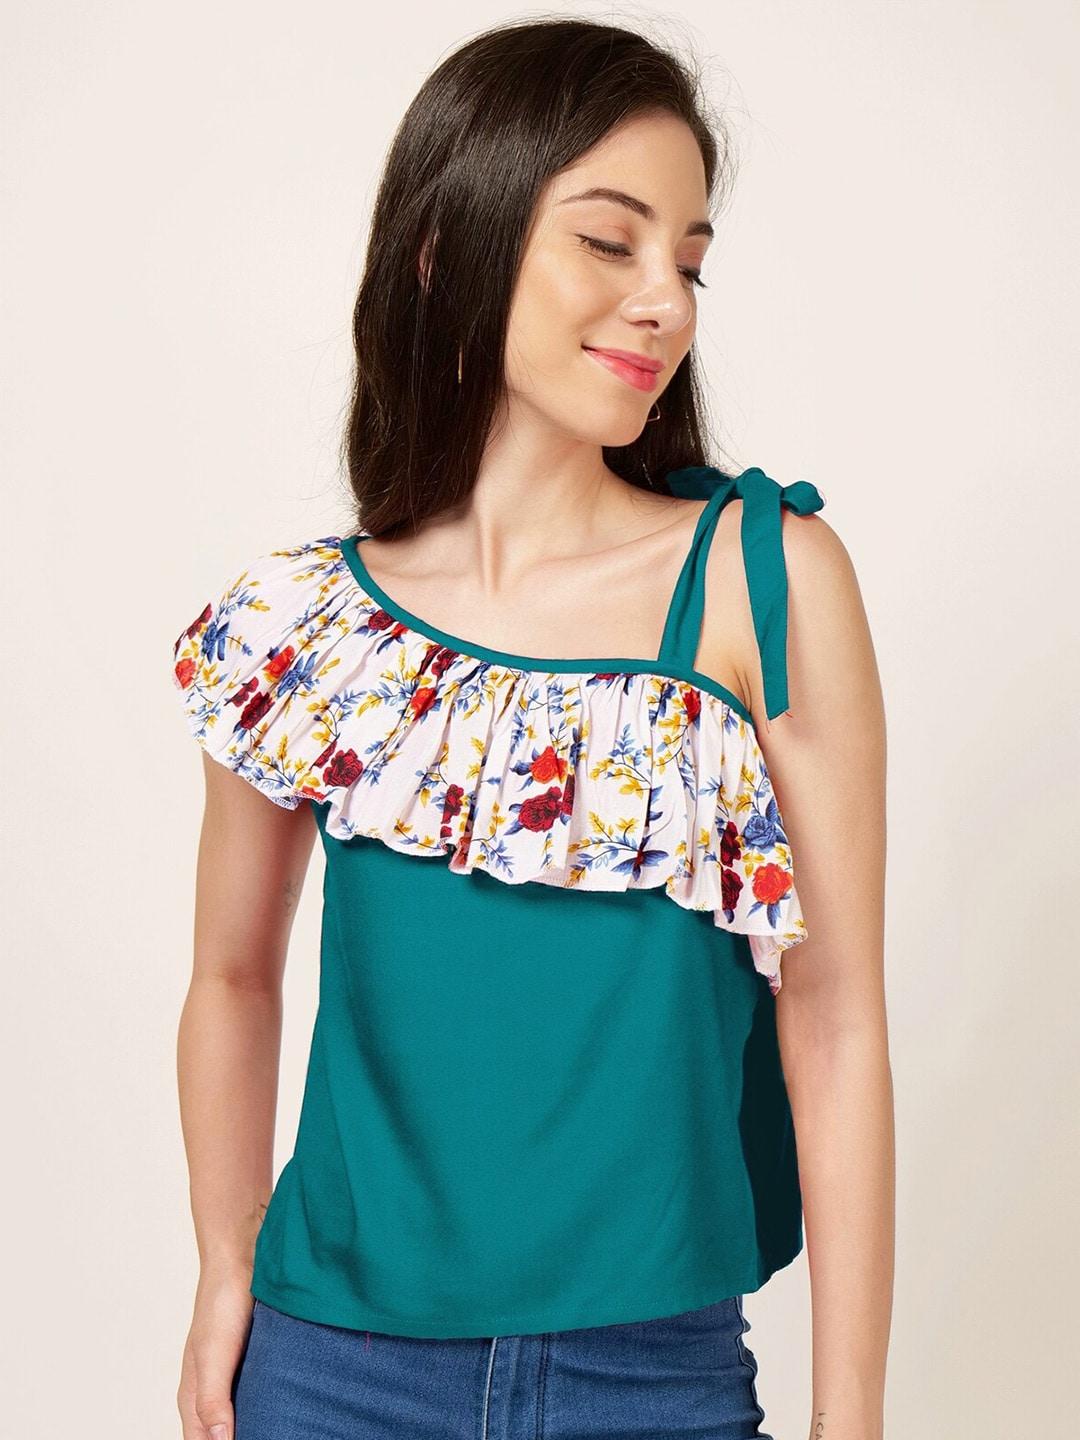 PATRORNA Floral Printed One Shoulder Ruffle Cotton Top